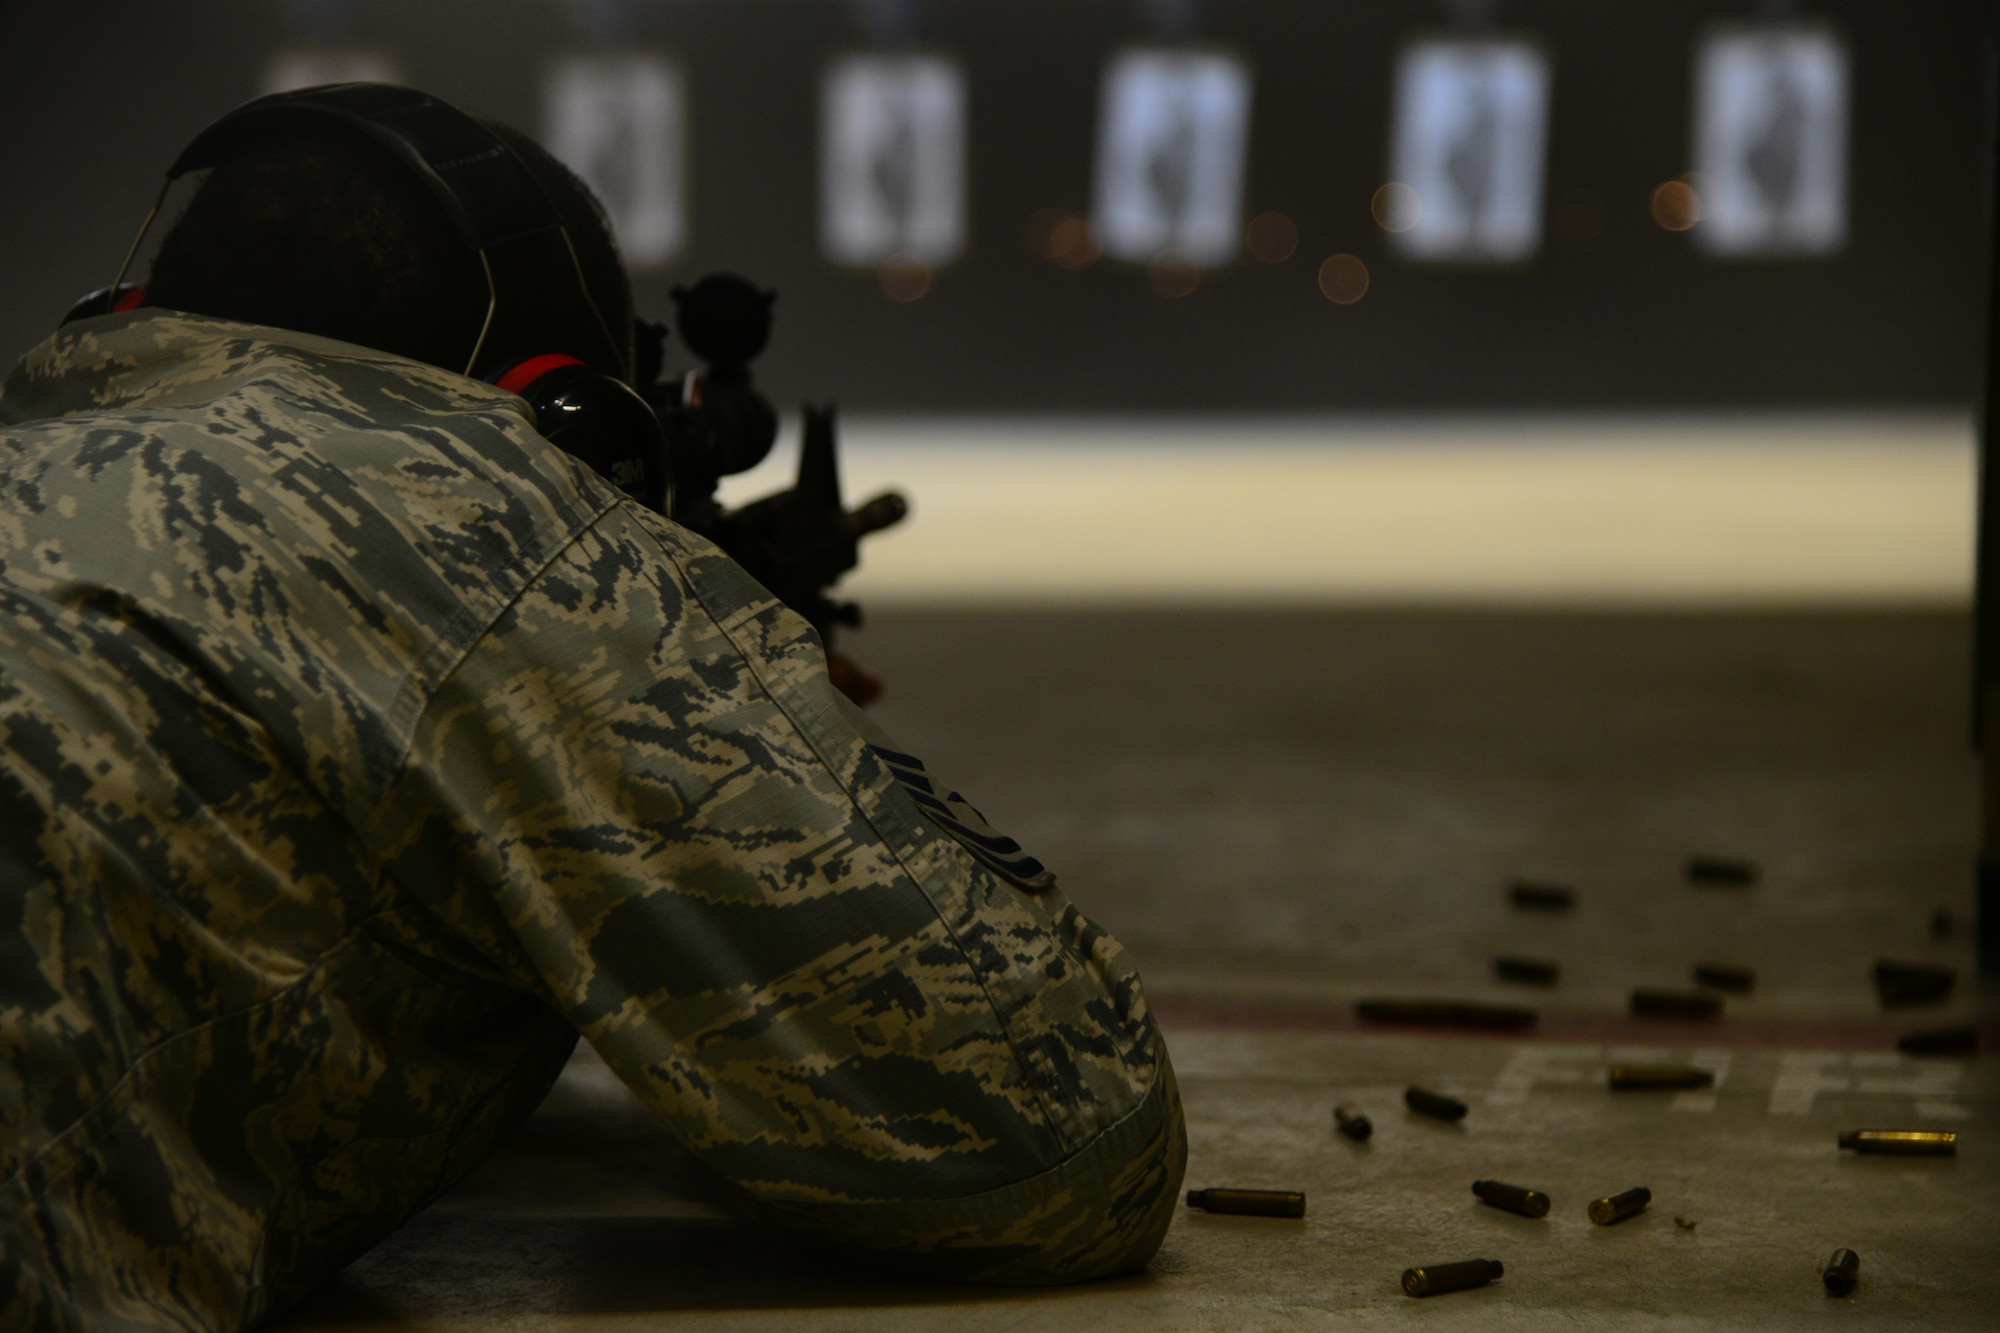 U.S. Air Force Master Sgt. Julimain Patterson, Special Operations Command Central Forward first sergeant, fires an M-4 carbine rifle at Al Udeid Air Base, Qatar. Servicemembers are required to qualify prior to a deployment, and include being able to use the techniques from four stationary positions: lying down with a support, lying down without a support, kneeling with a support and standing behind a barricade. (U.S. Air Force photo by Staff Sgt. Ciara Wymbs)